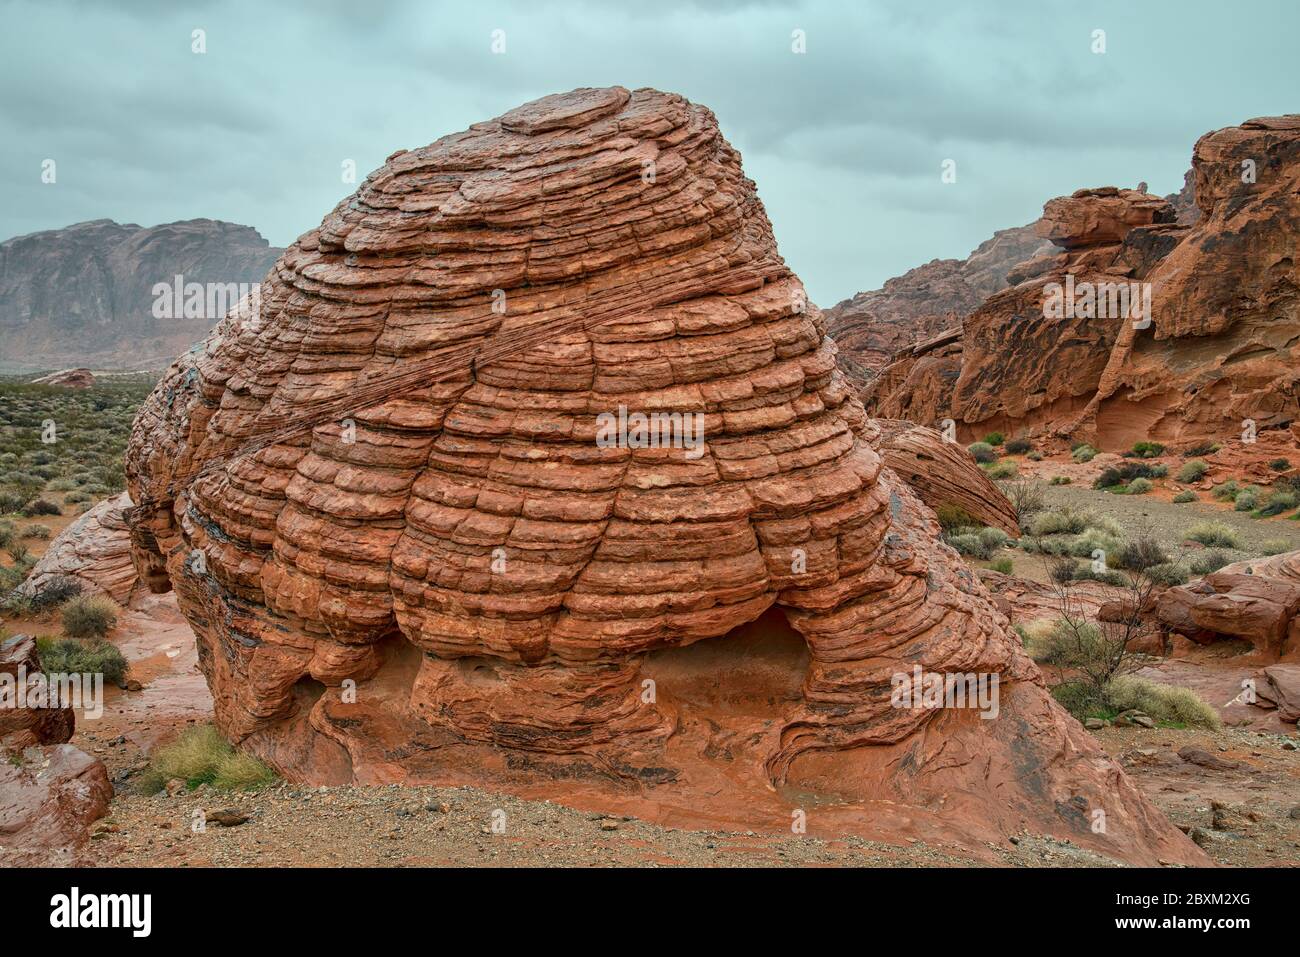 The Beehive - a rock formation in the Valley of Fire, Nevada. Image taken in the rain so the rocks are wet. Stock Photo